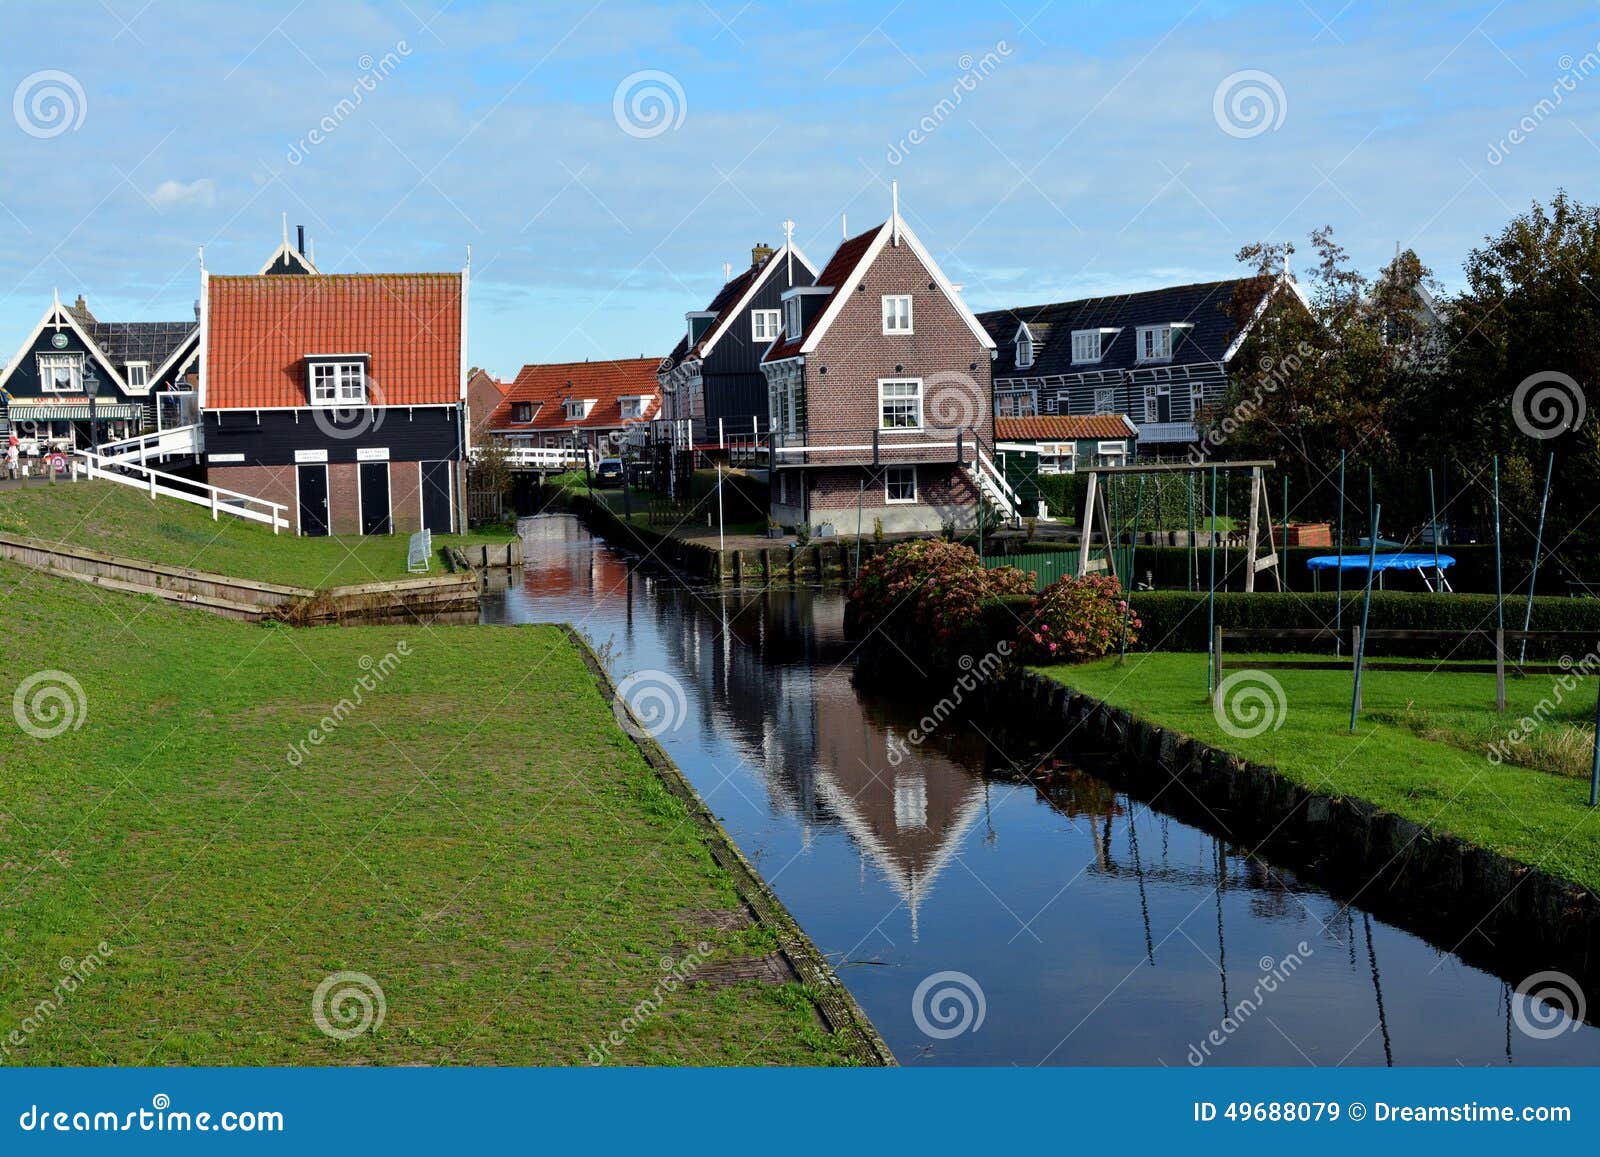 holiday to amsterdam and volendam landscape